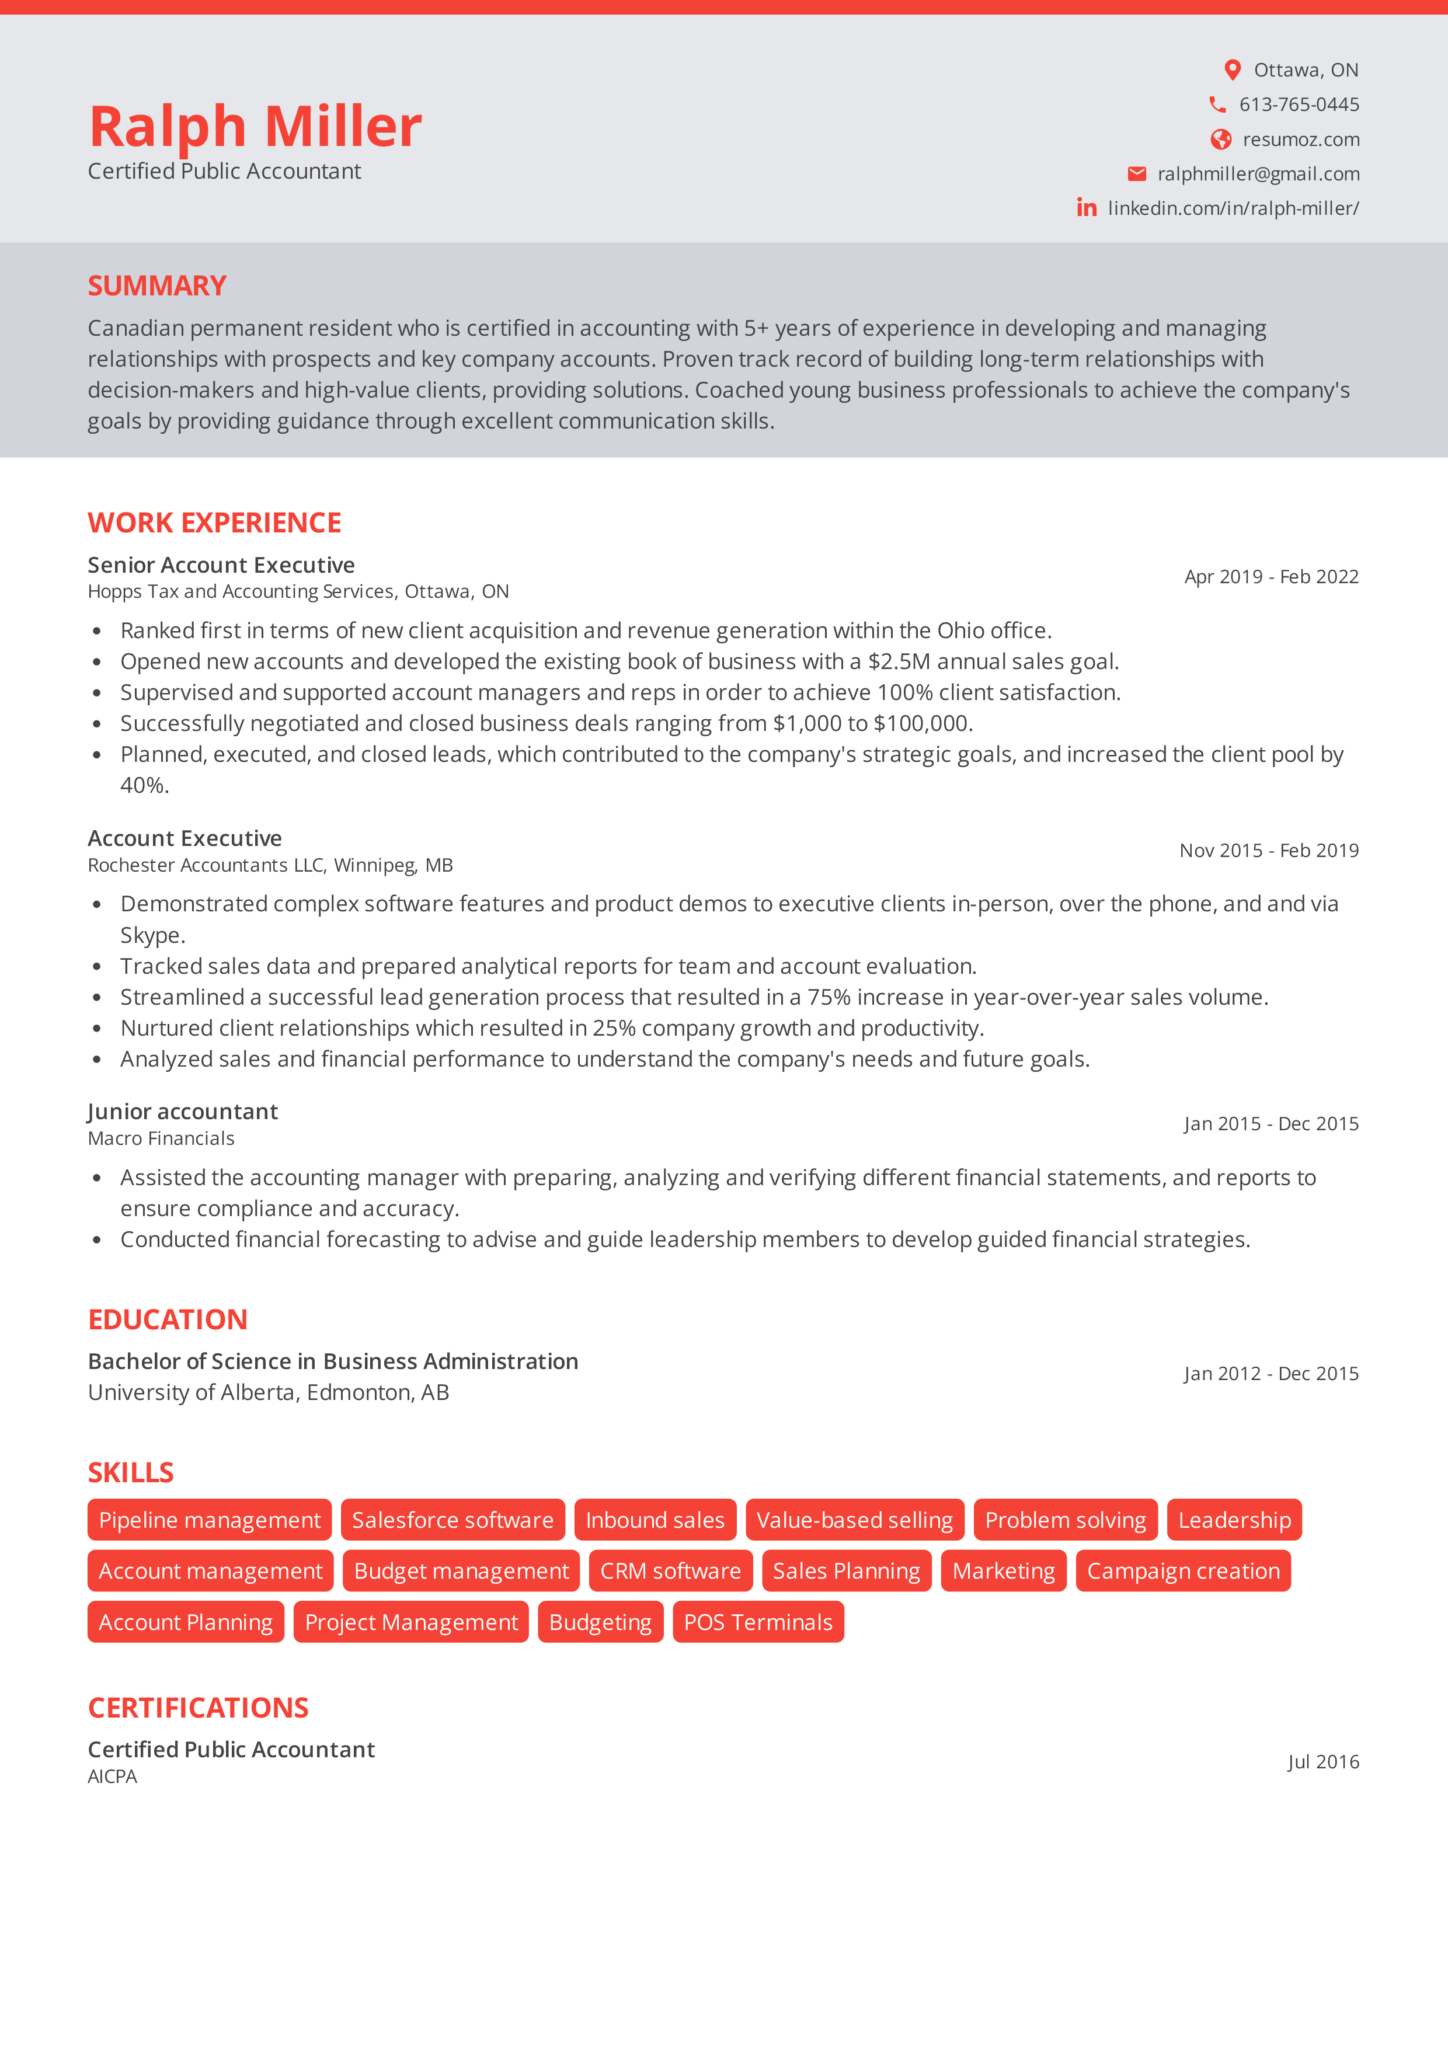 how to write a resume in canada